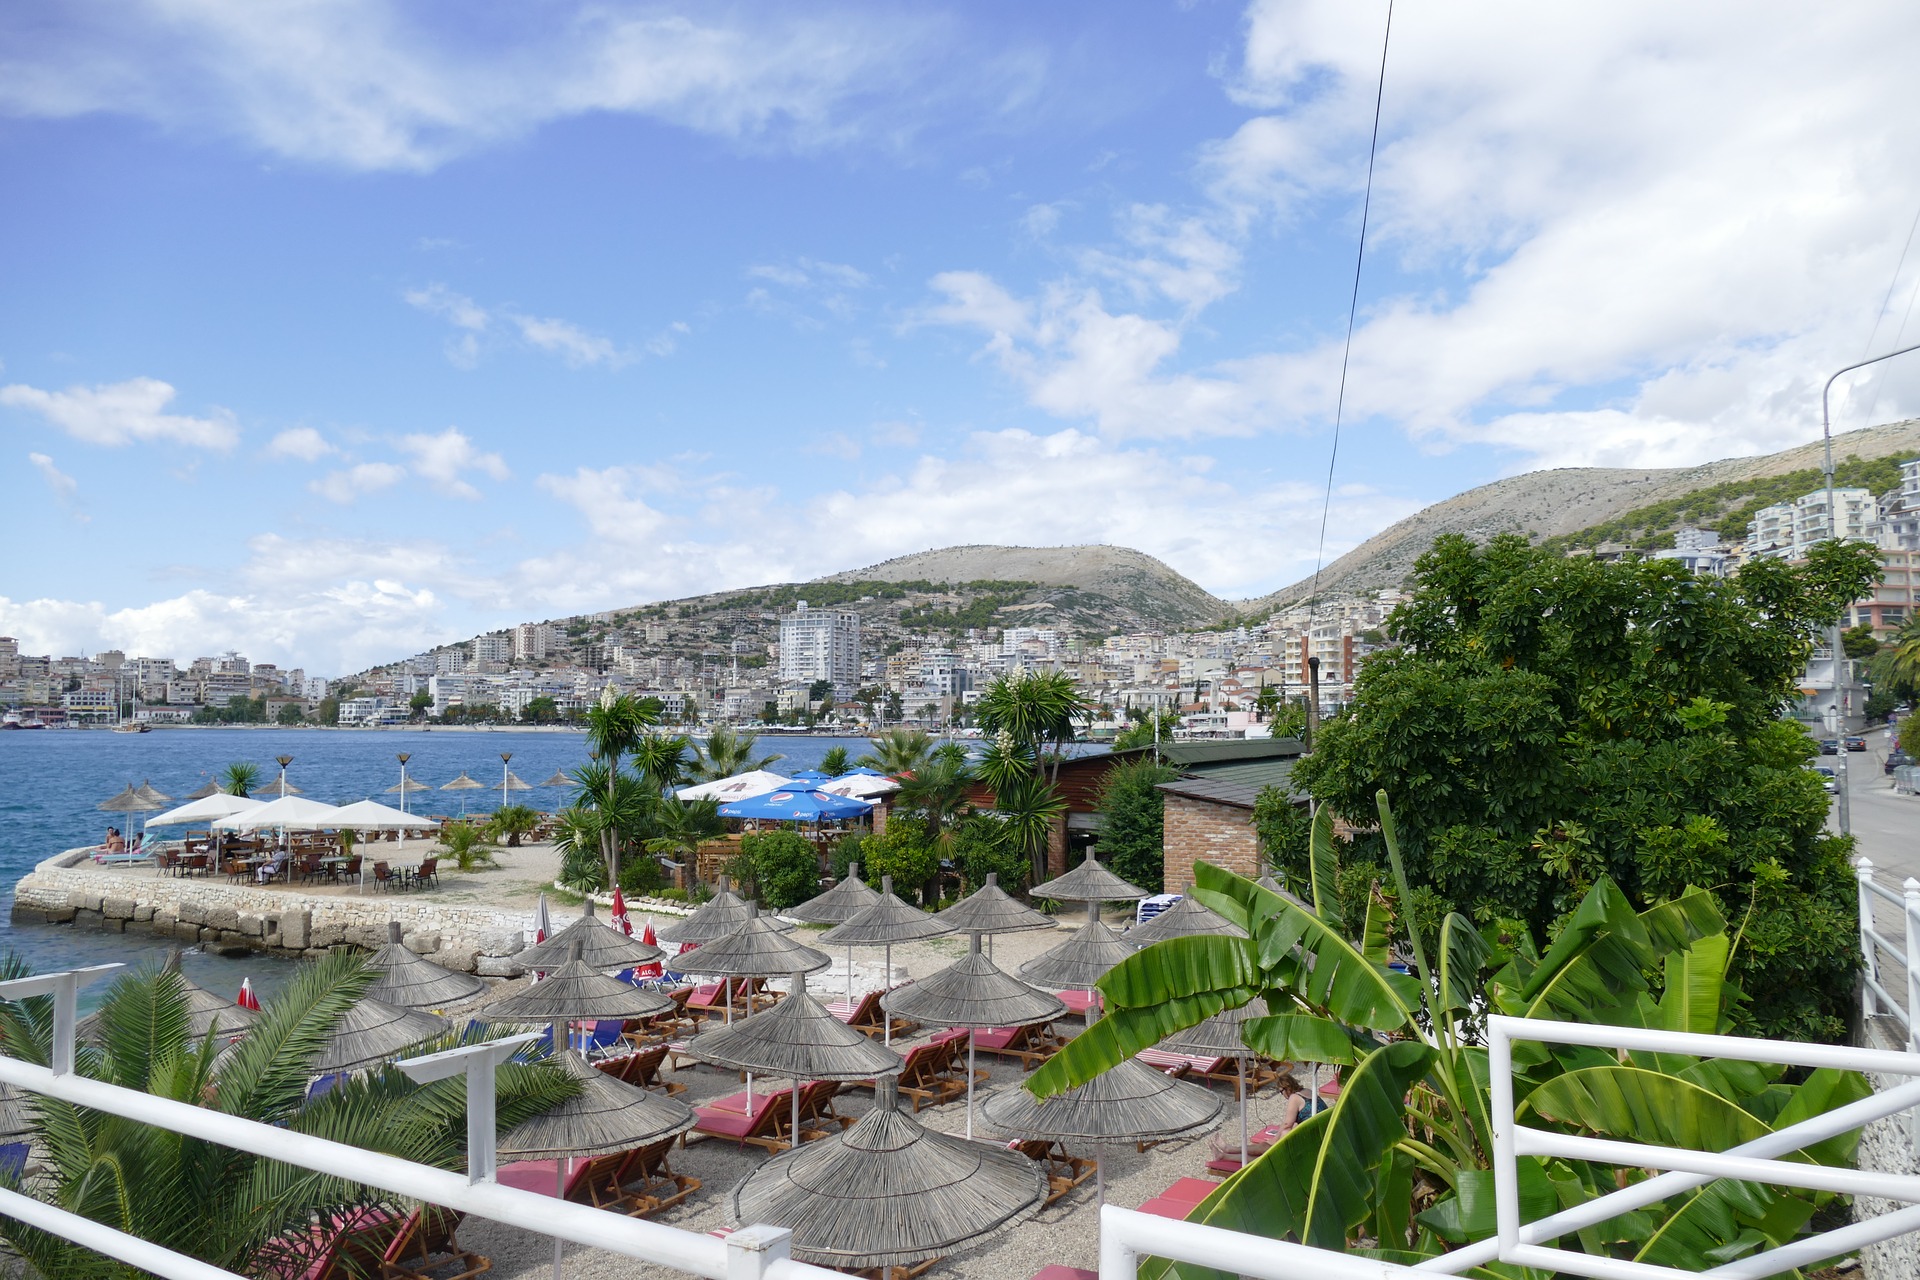 <p>Albania is a relatively unknown country that offers a lot to the tourist at a very good price. For example, a shared room with breakfast included may cost about 20-25 dollars for two people.</p>